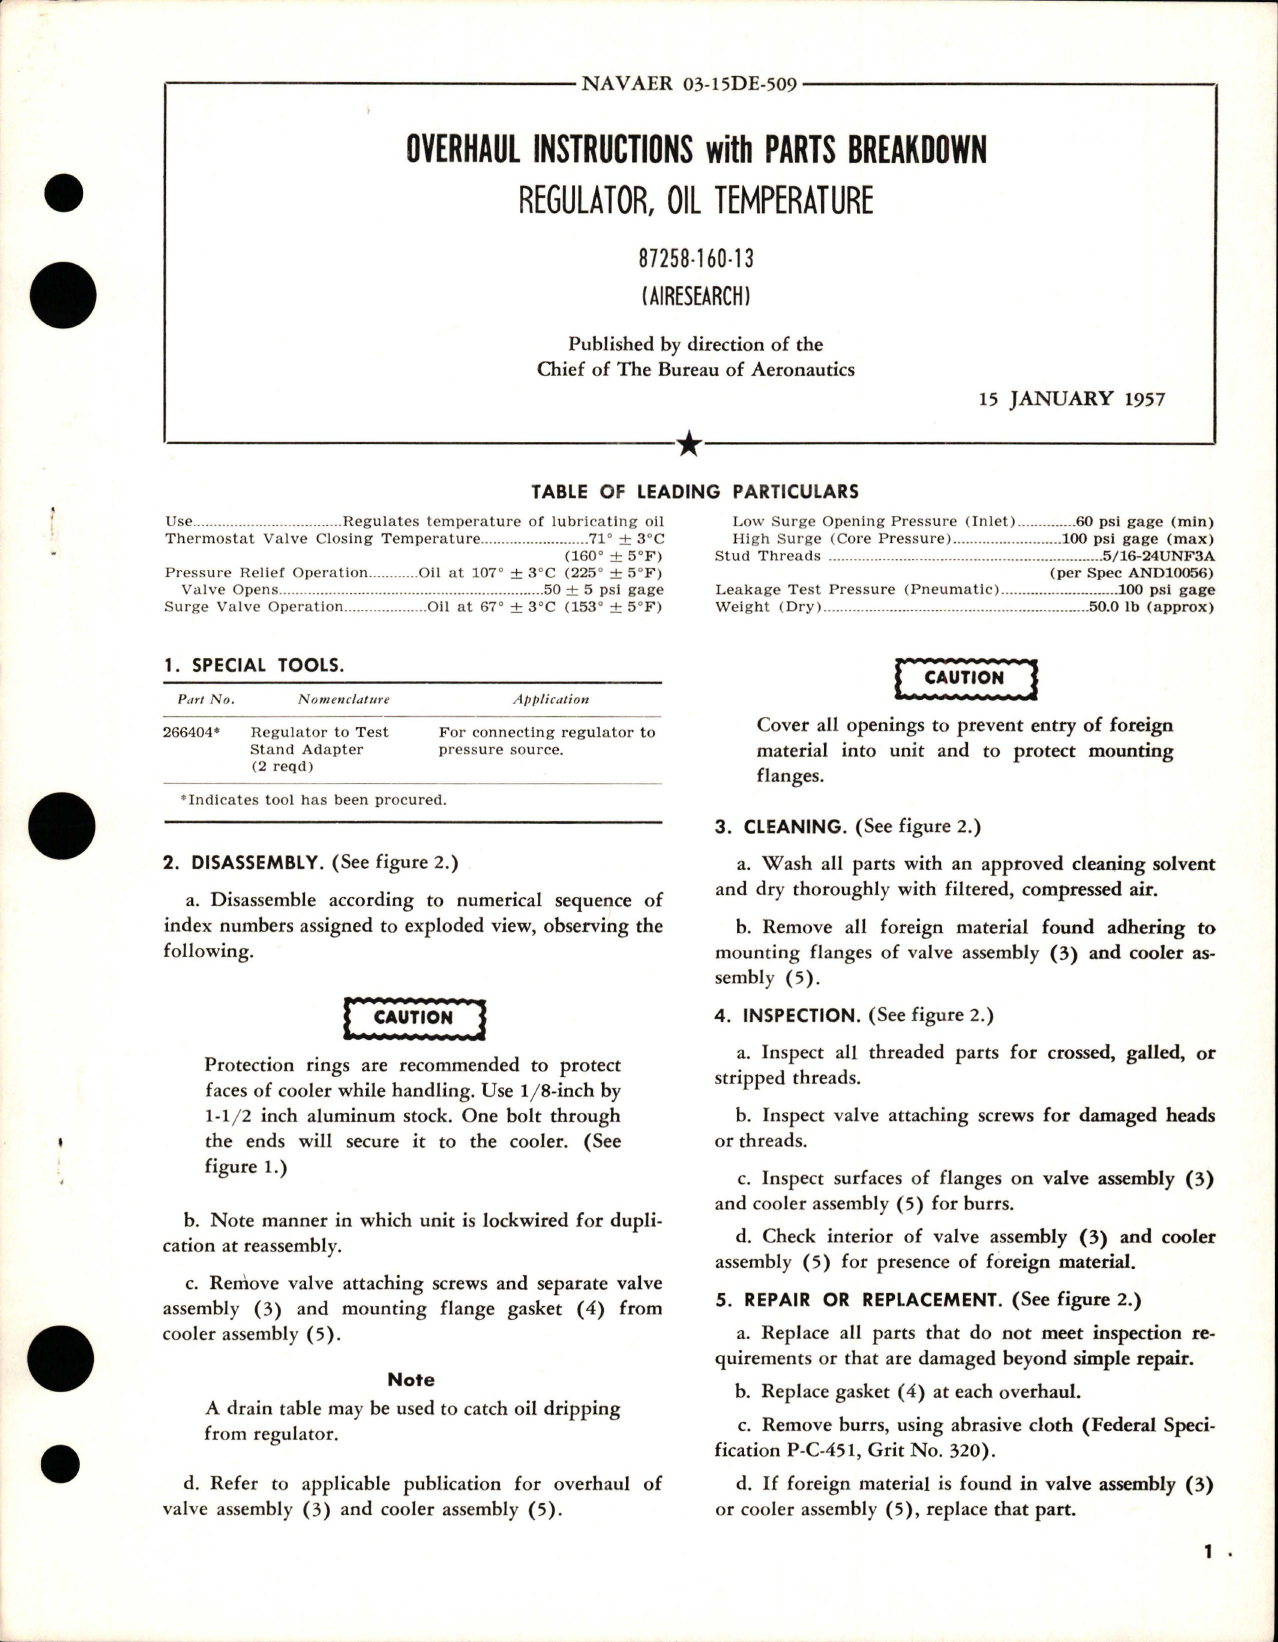 Sample page 1 from AirCorps Library document: Overhaul Instructions with Parts Breakdown for Oil Temperature Regulator - 87258-160-13